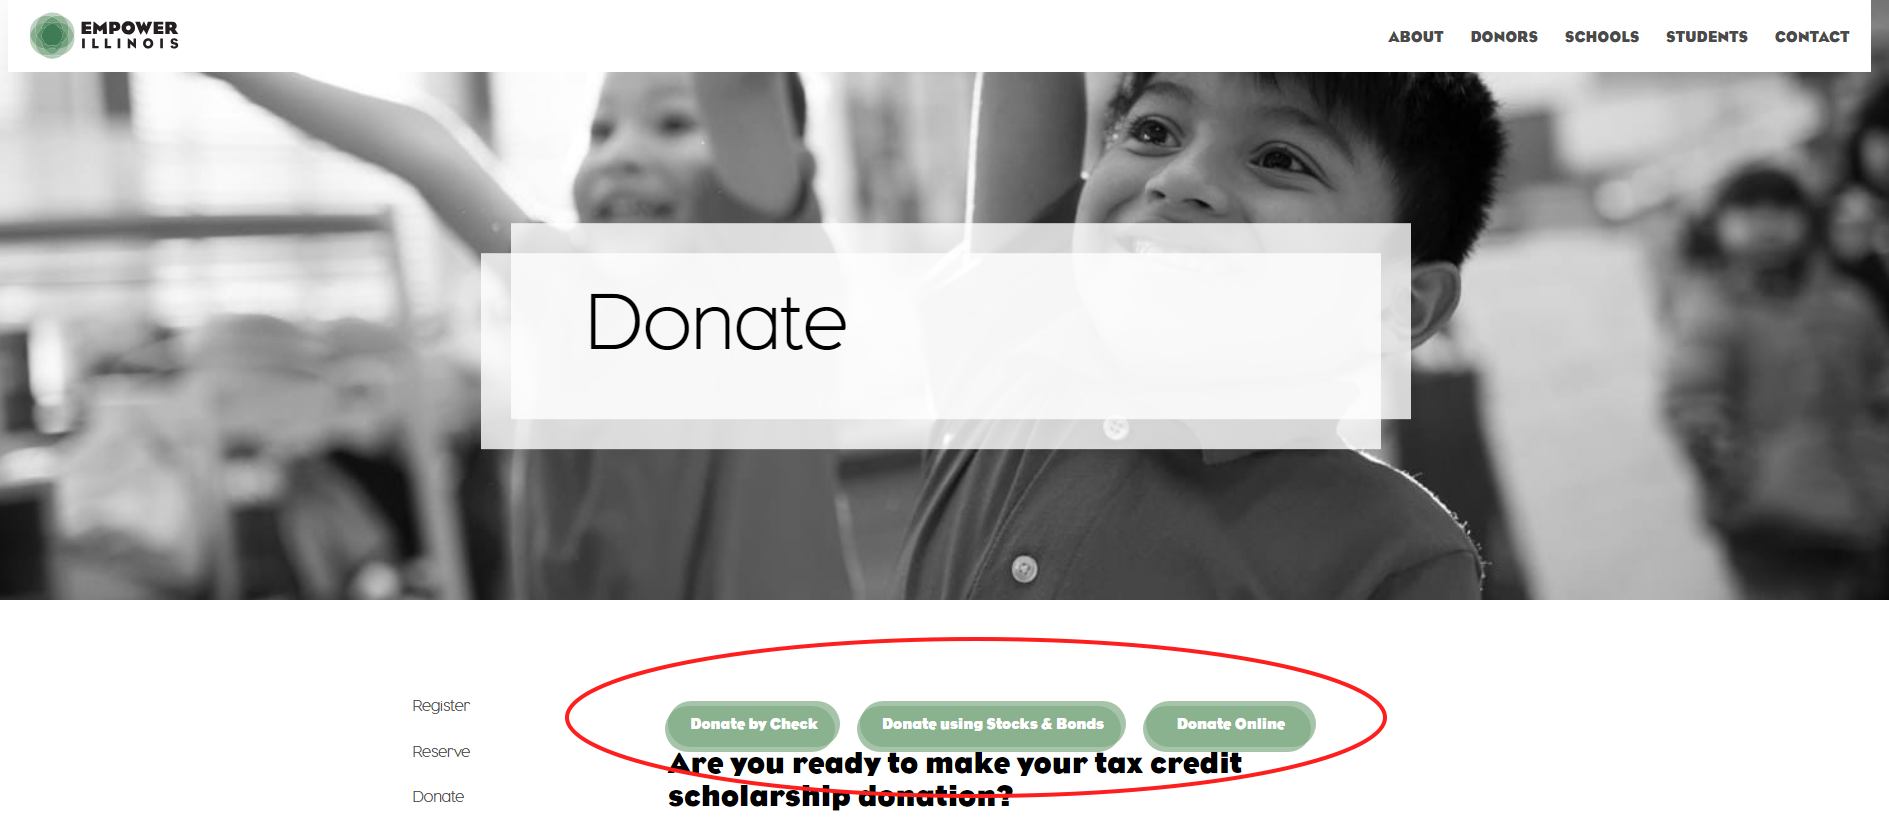 Empower Illinois Donation Page